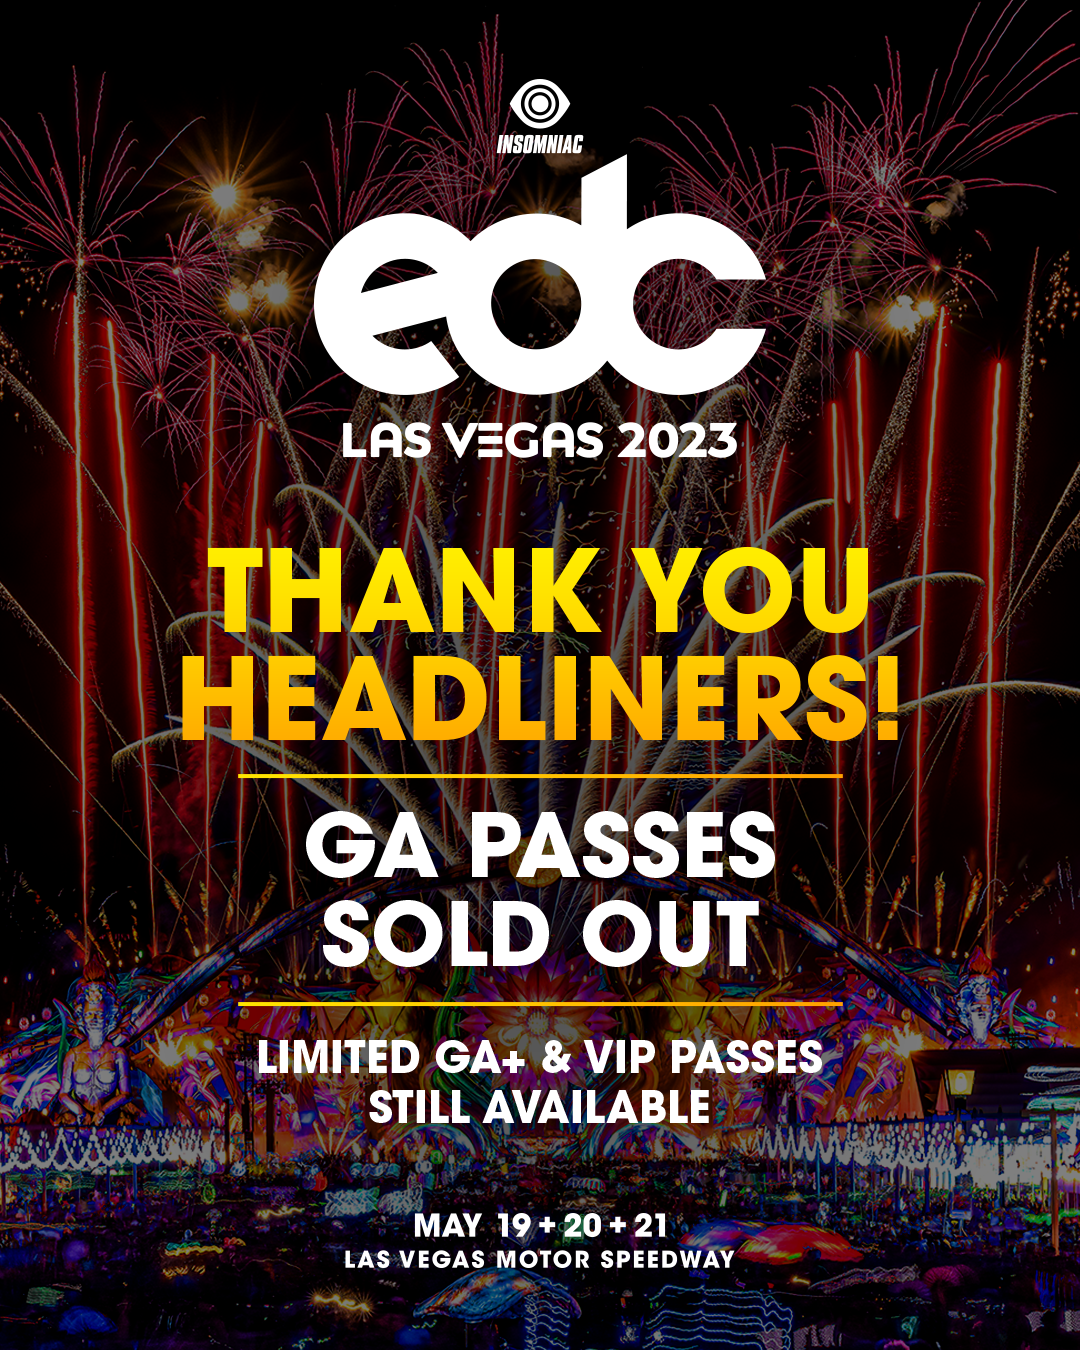 EDC Las Vegas 2023 Tickets On Sale, GA Sells Out in Minutes EDM Life